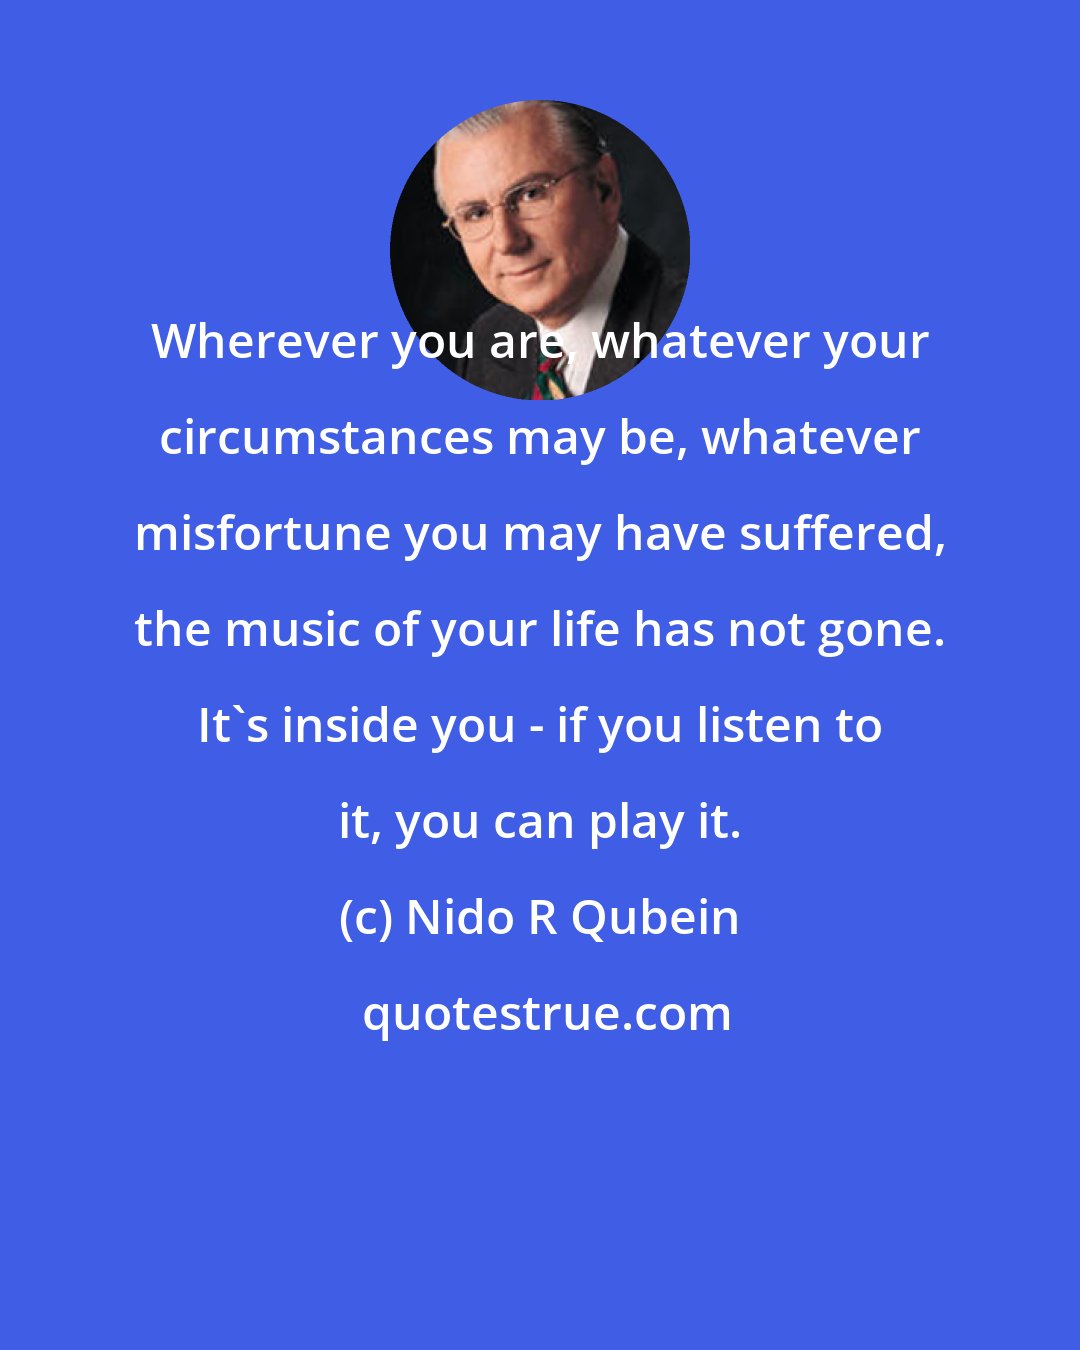 Nido R Qubein: Wherever you are, whatever your circumstances may be, whatever misfortune you may have suffered, the music of your life has not gone. It's inside you - if you listen to it, you can play it.